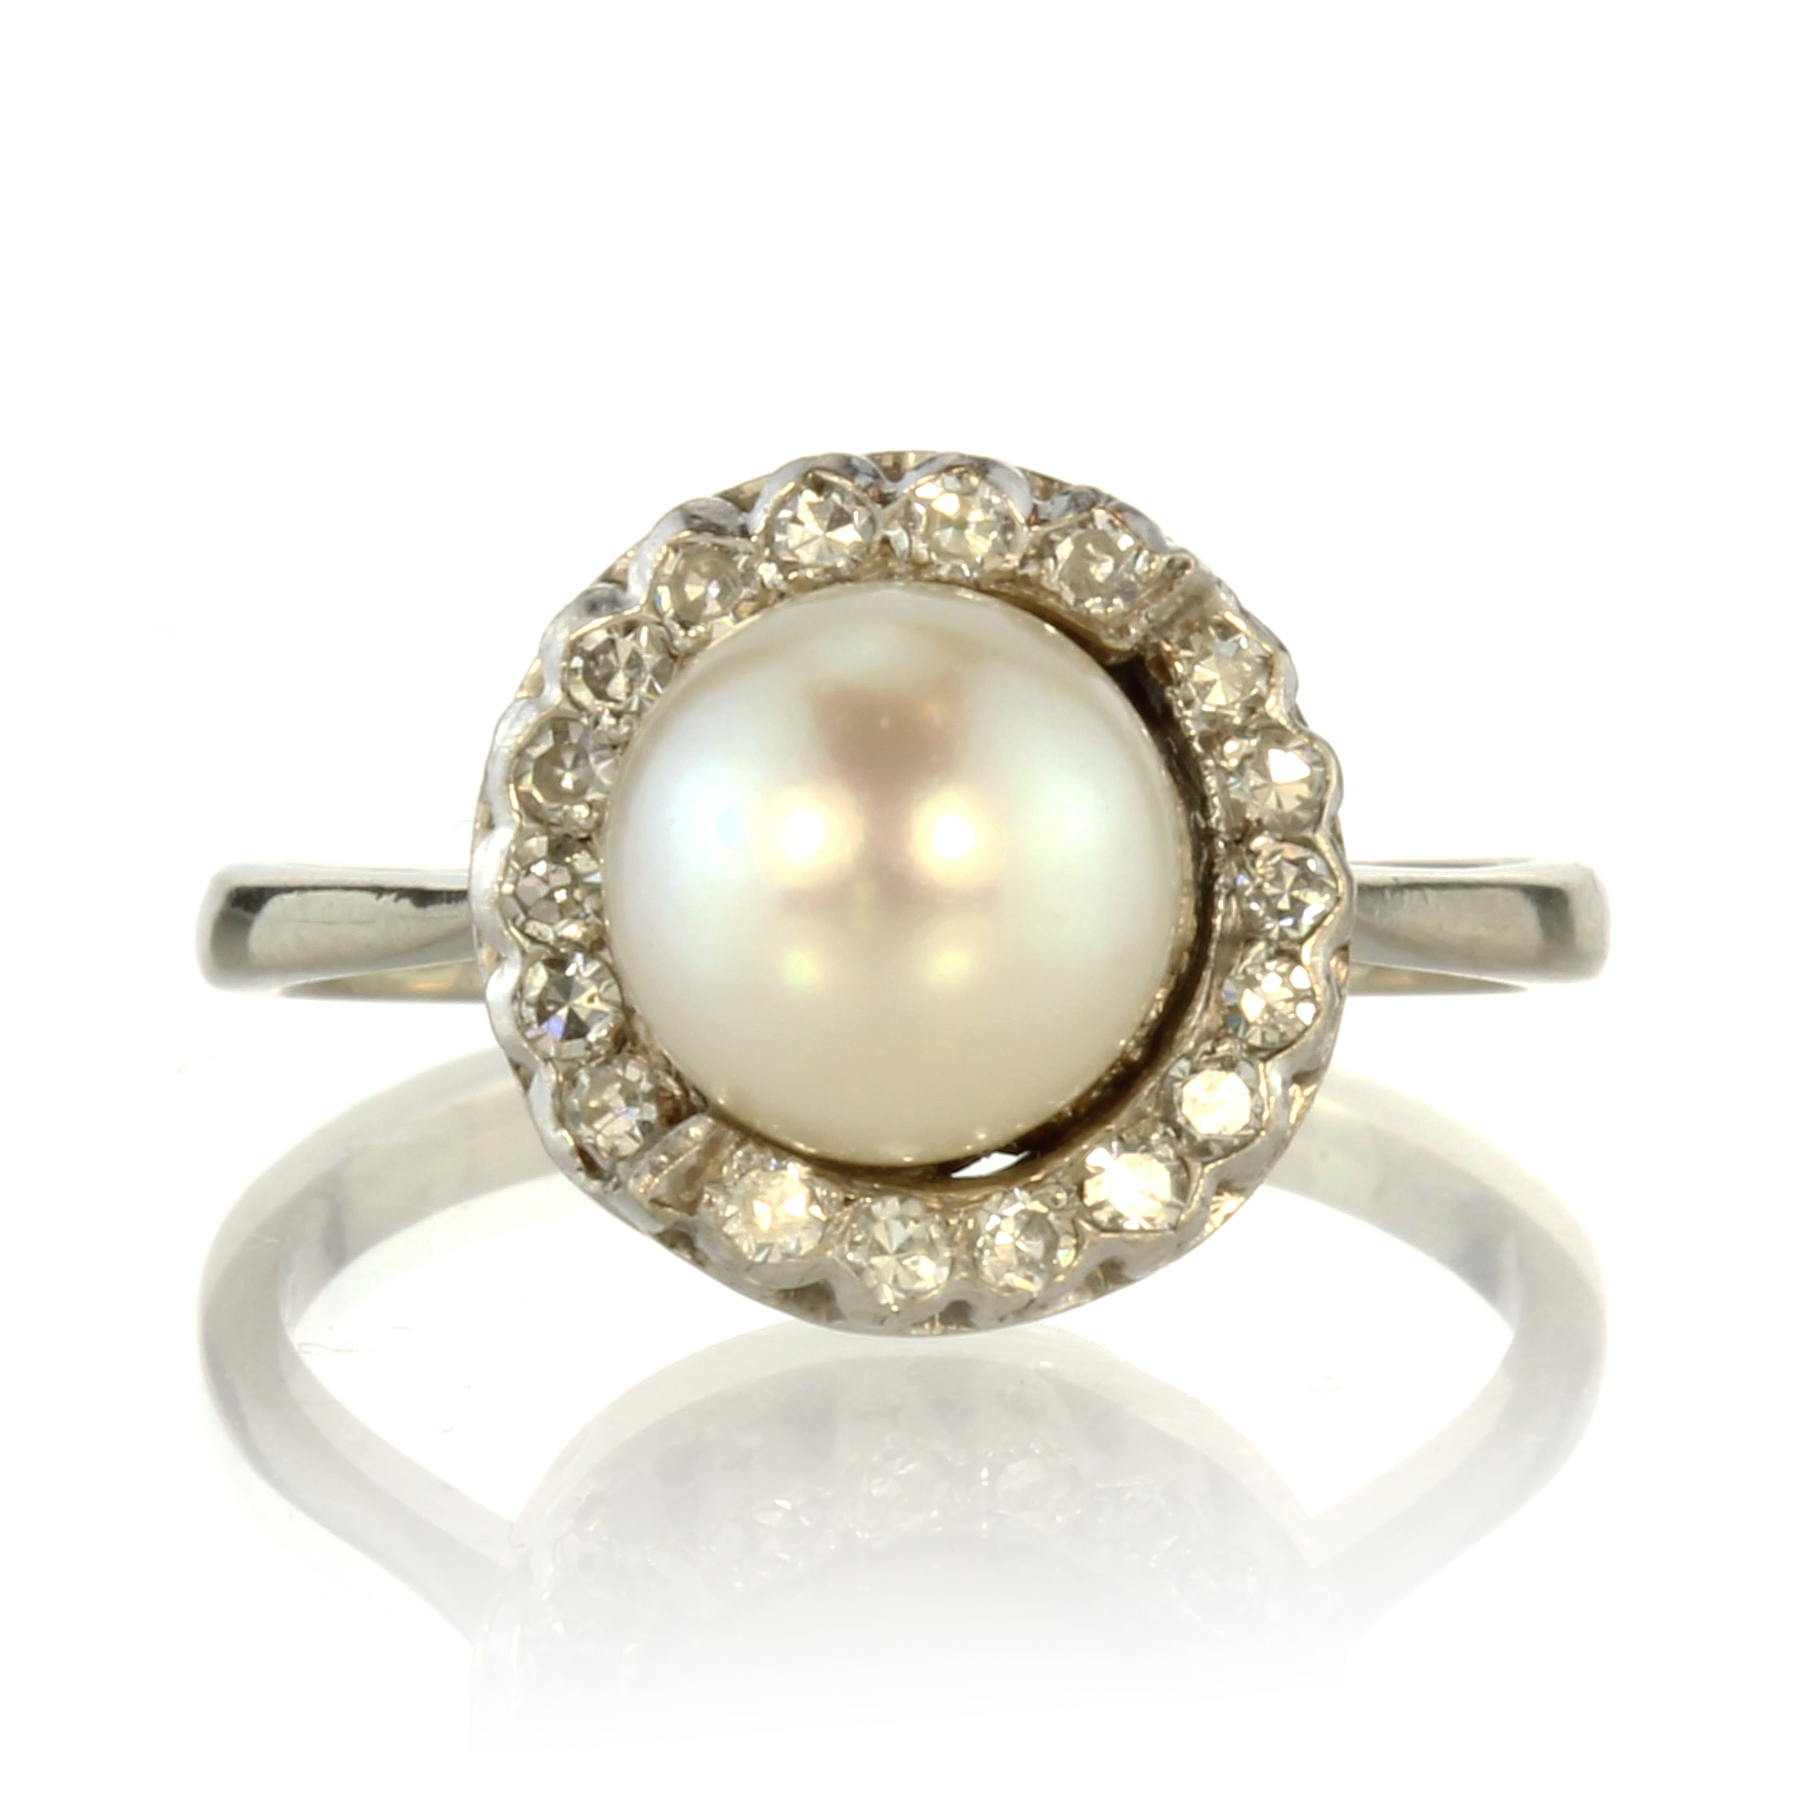 A pearl and diamond cluster dress ring in 18ct white gold set with a central pearl of 8.2mm in